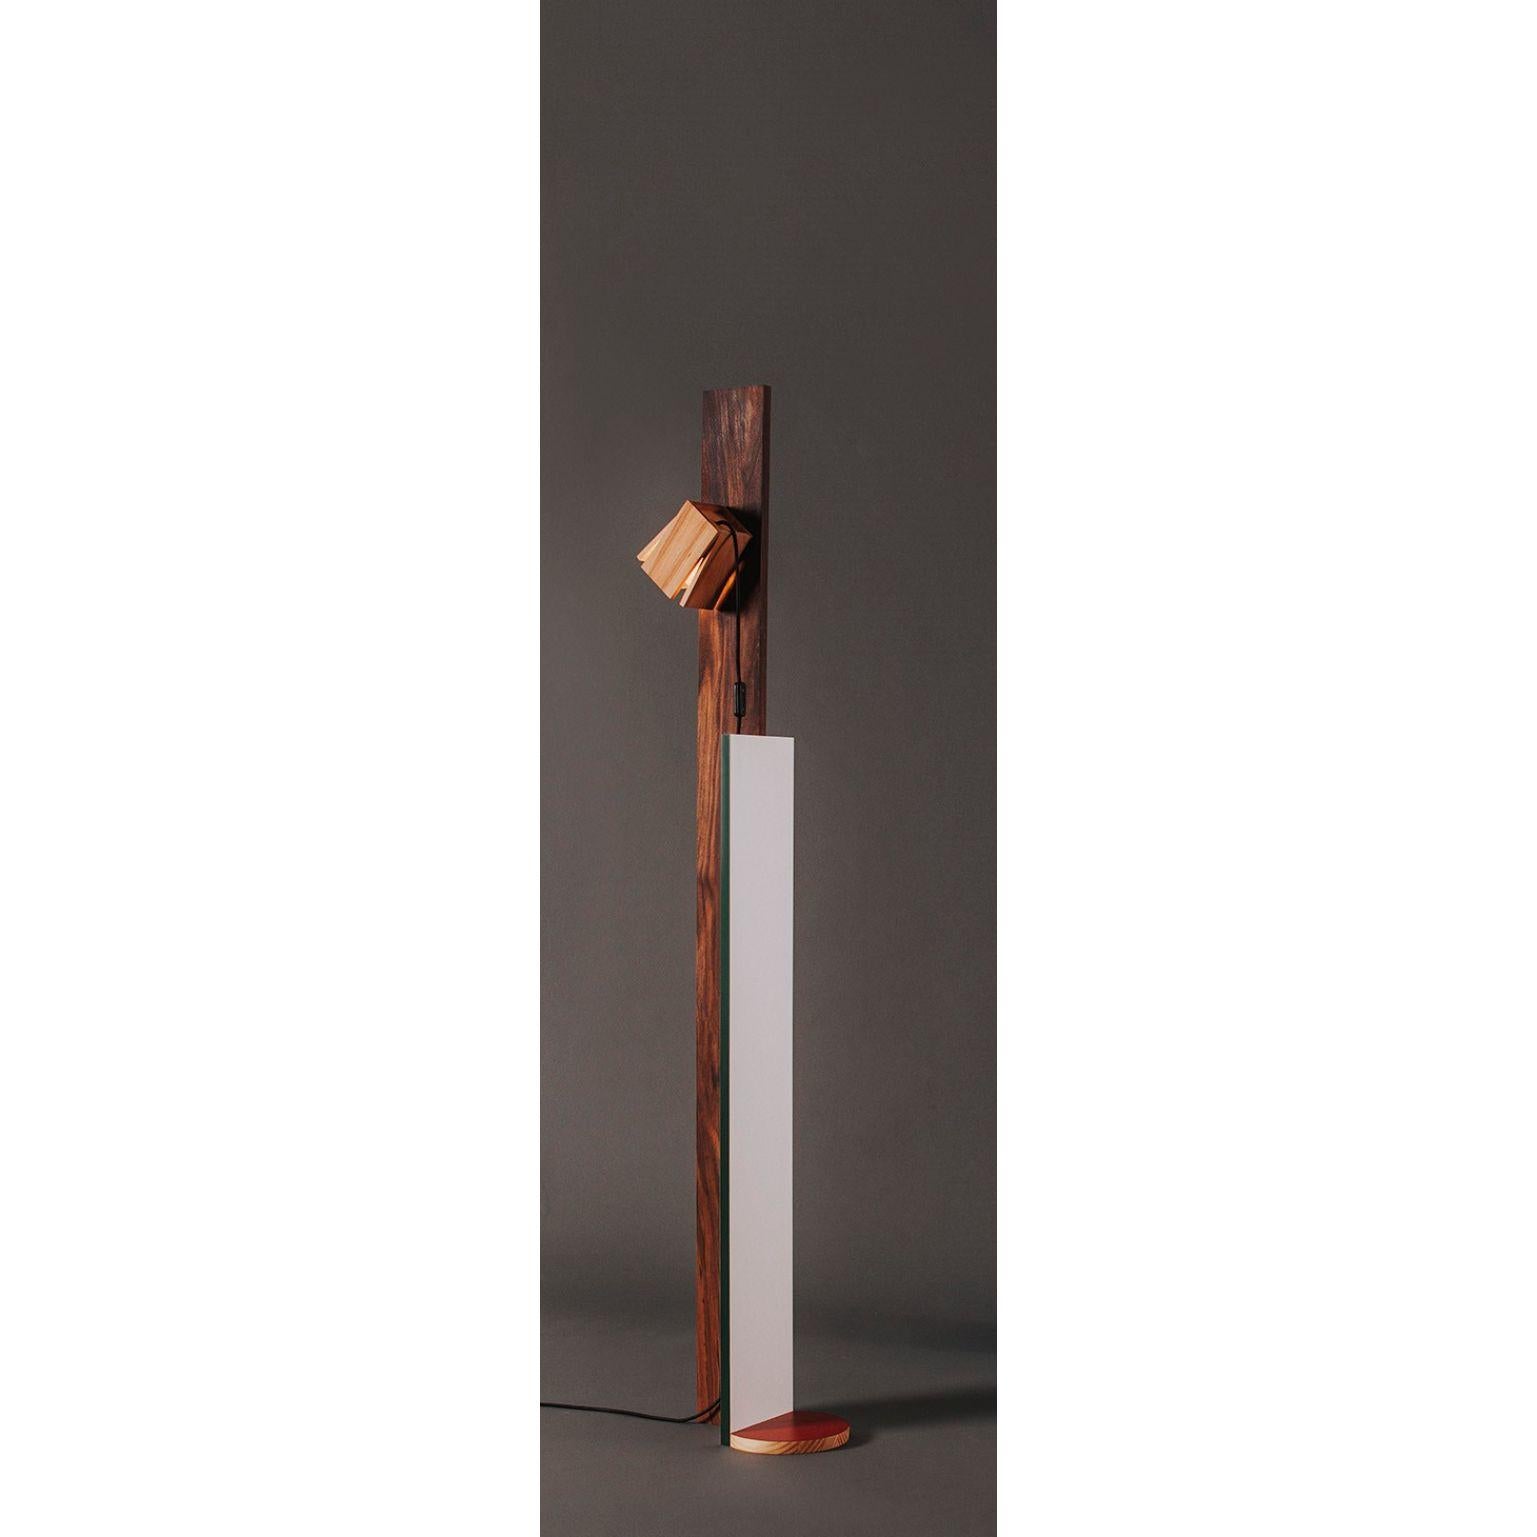 Tall formica floor lamp by Owl
Dimensions: H 190 x L 35 x W 35 cm
Materials: Solid wood, colourful formica

Formica is a series in which material defines form. The collection combines solid wood with colourful Formica, creating a furniture